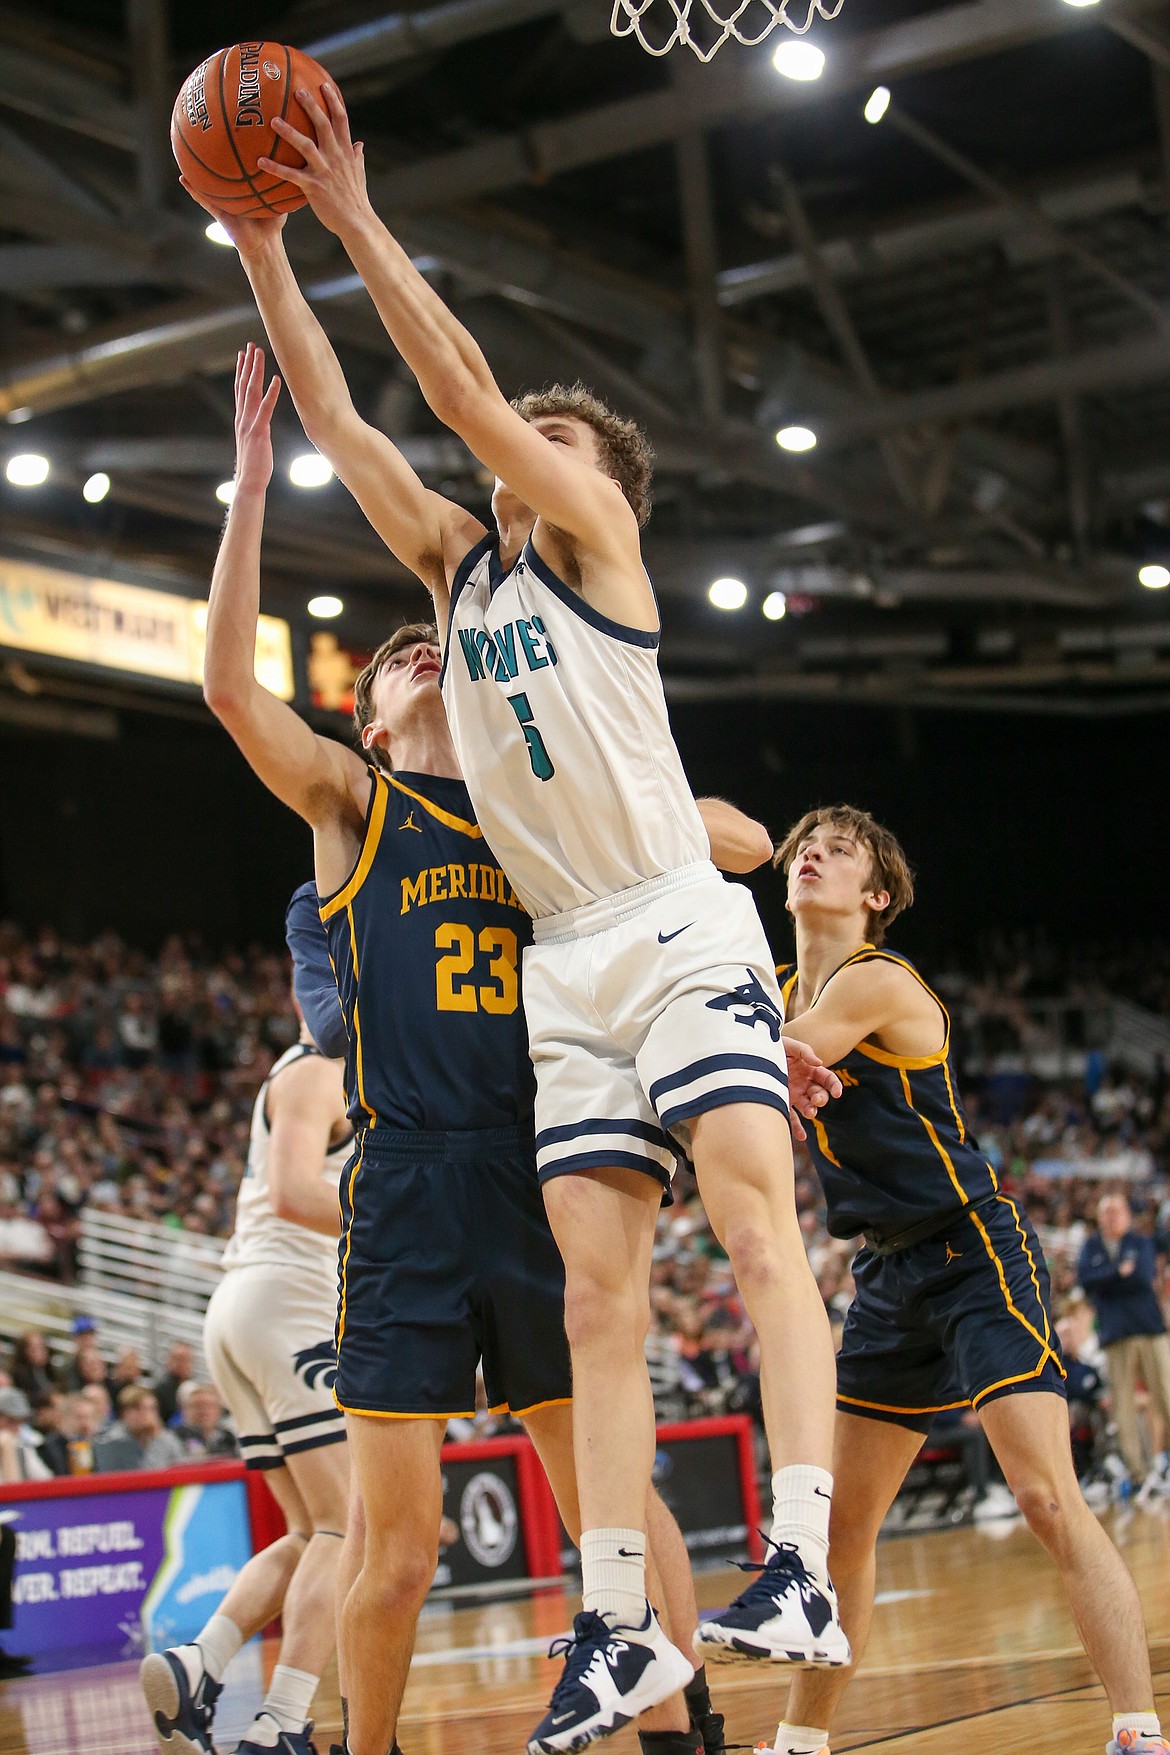 JASON DUCHOW PHOTOGRAPHY
Lake City's Deacon Kiesbuy pulls down a rebound during Saturday's state 5A championship game in Nampa.